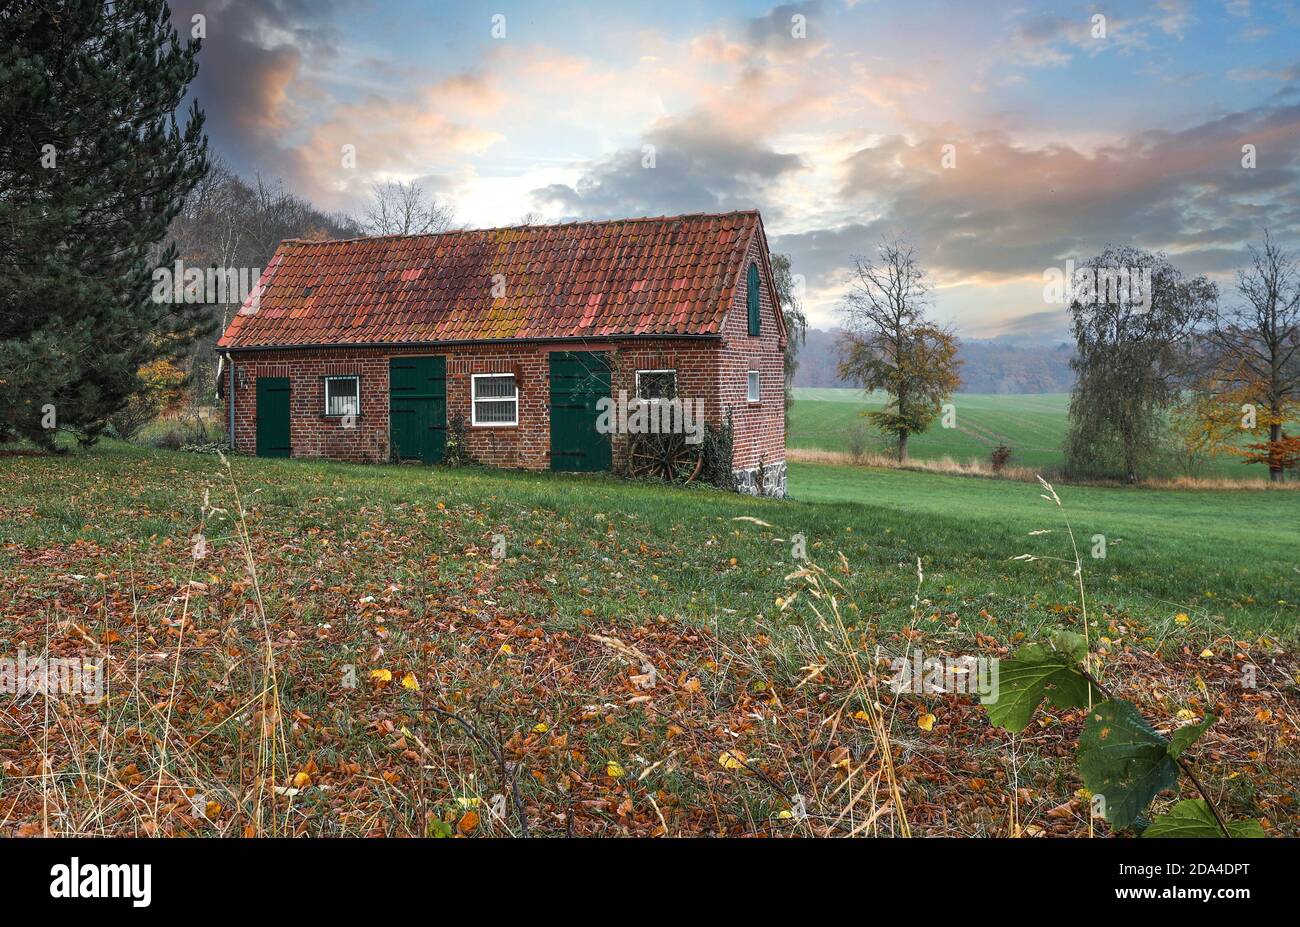 The outbuilding fits well into the hilly landscape of Holstein Switzerland. Stock Photo